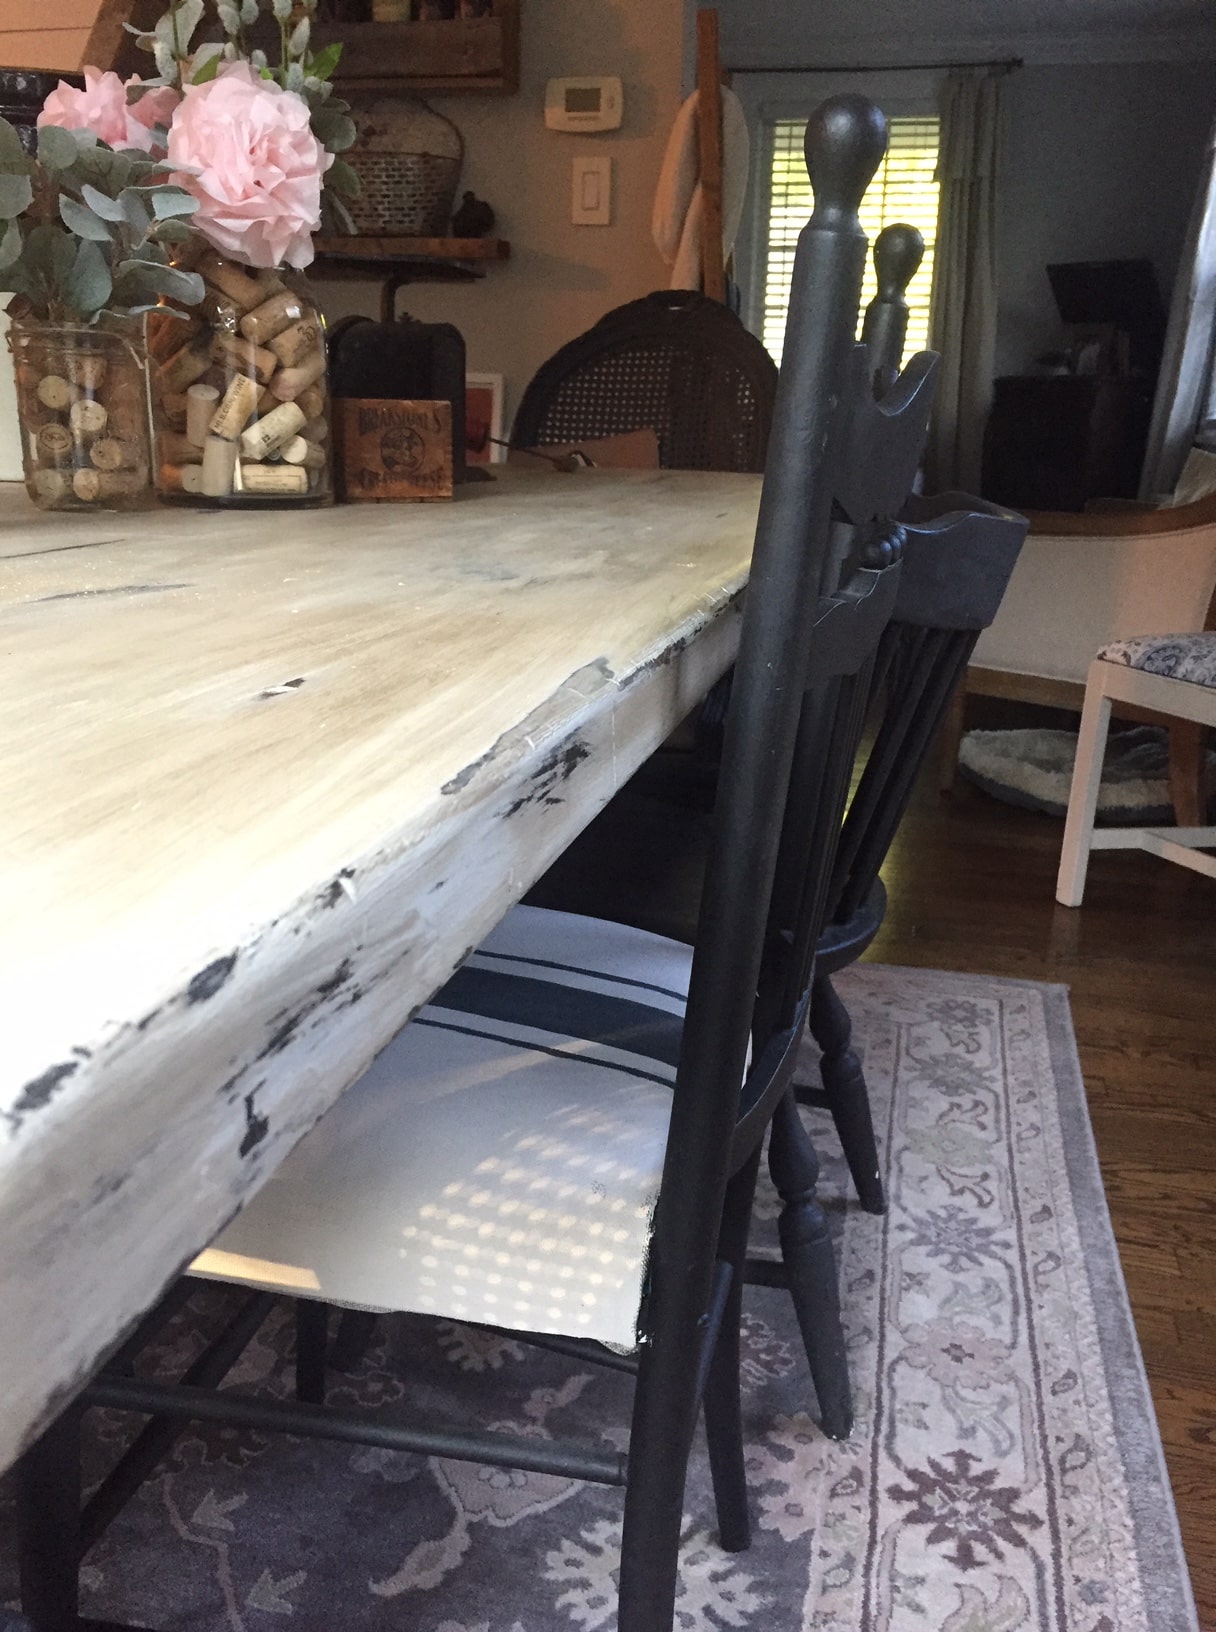 Chalk Paint Dining Room Table Is It A Good Idea West Magnolia Charm